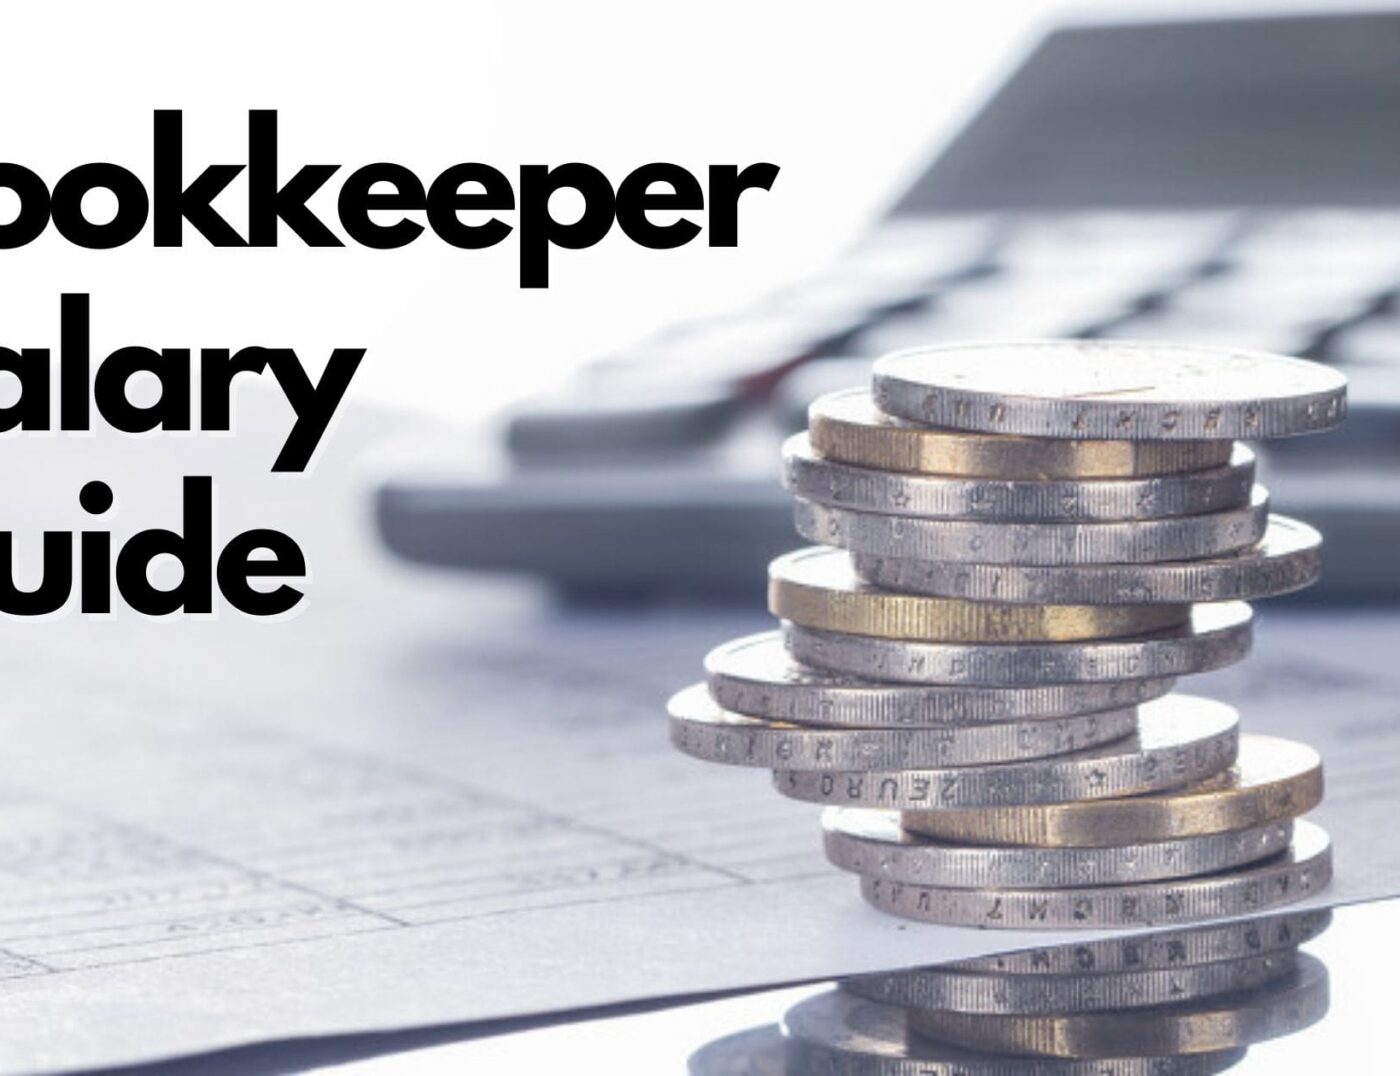 bookkeeping business salary